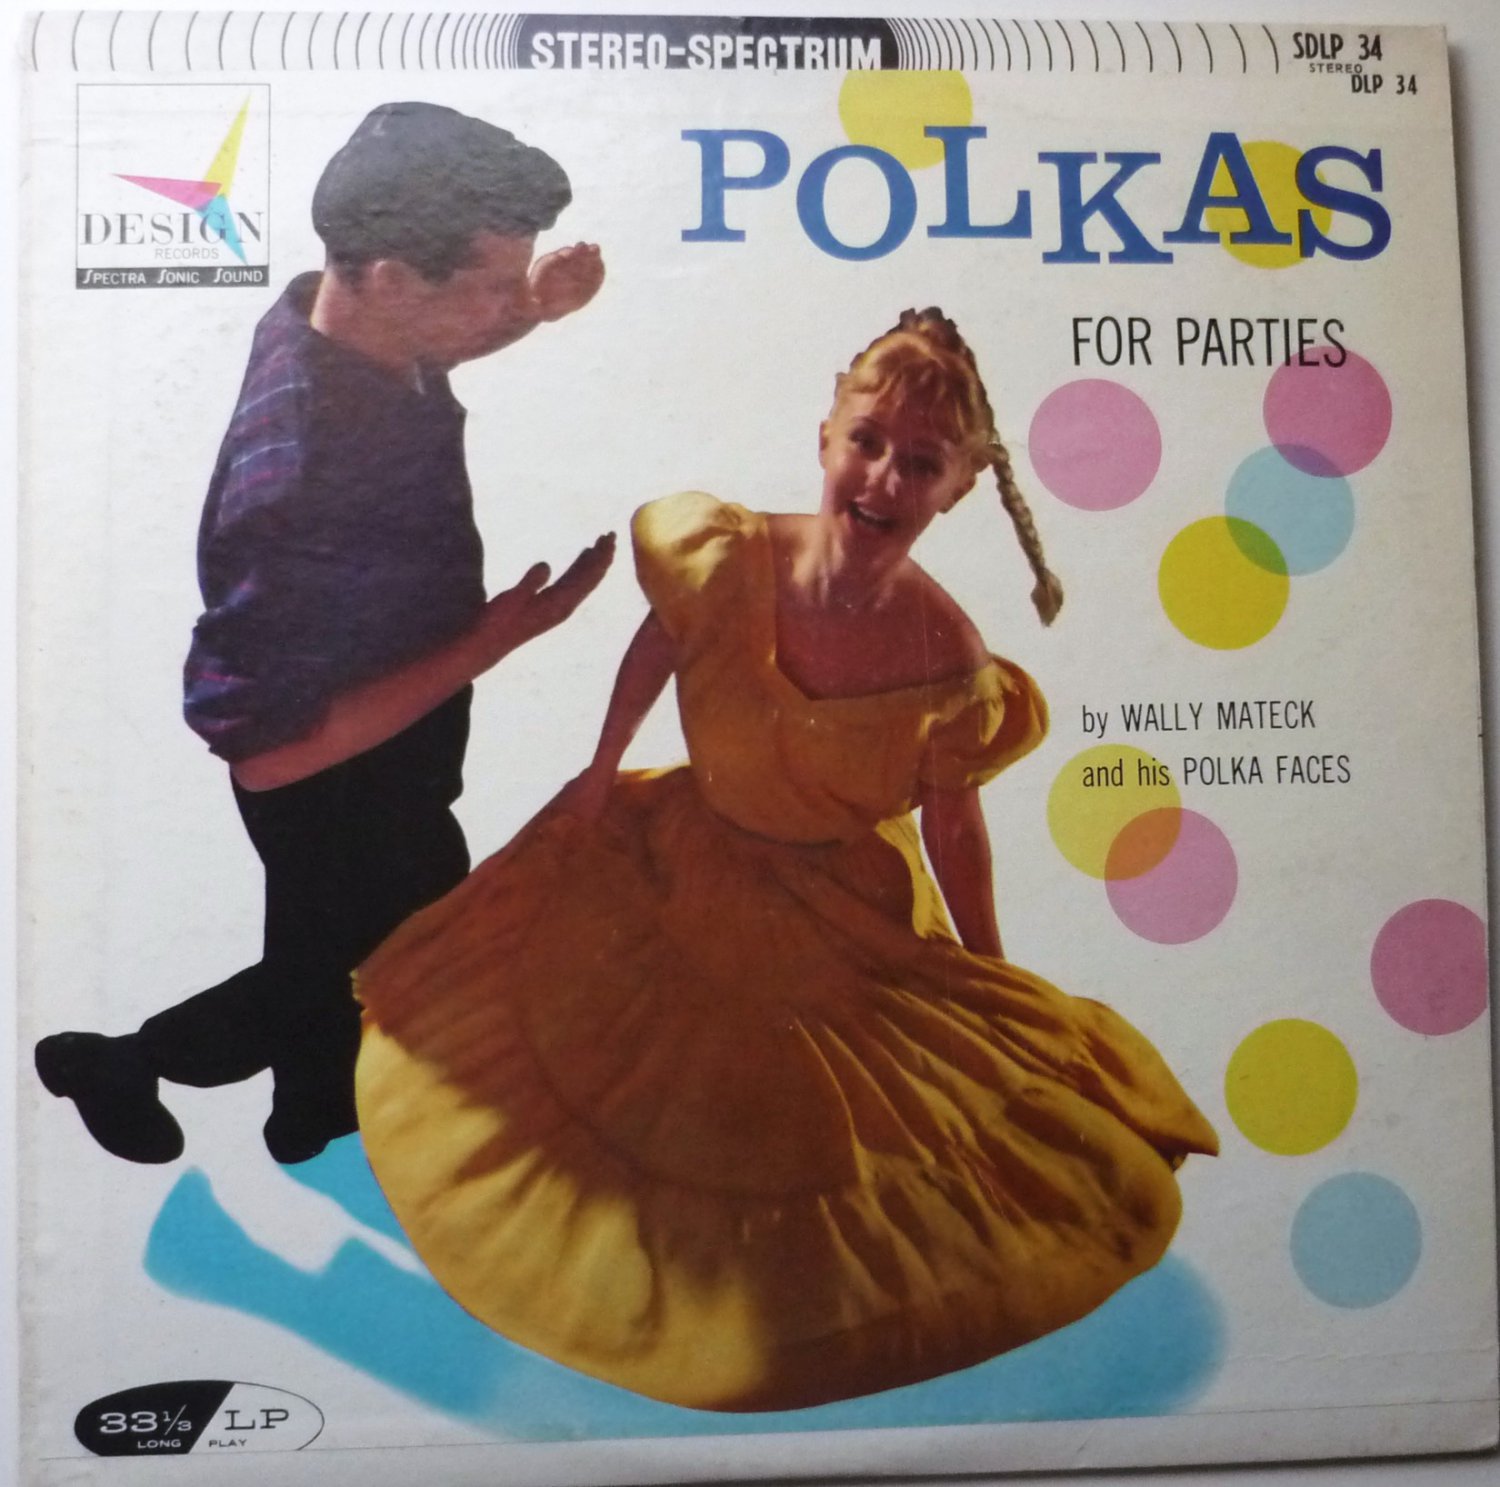 Polkas for Parties lp by Wally Mateck